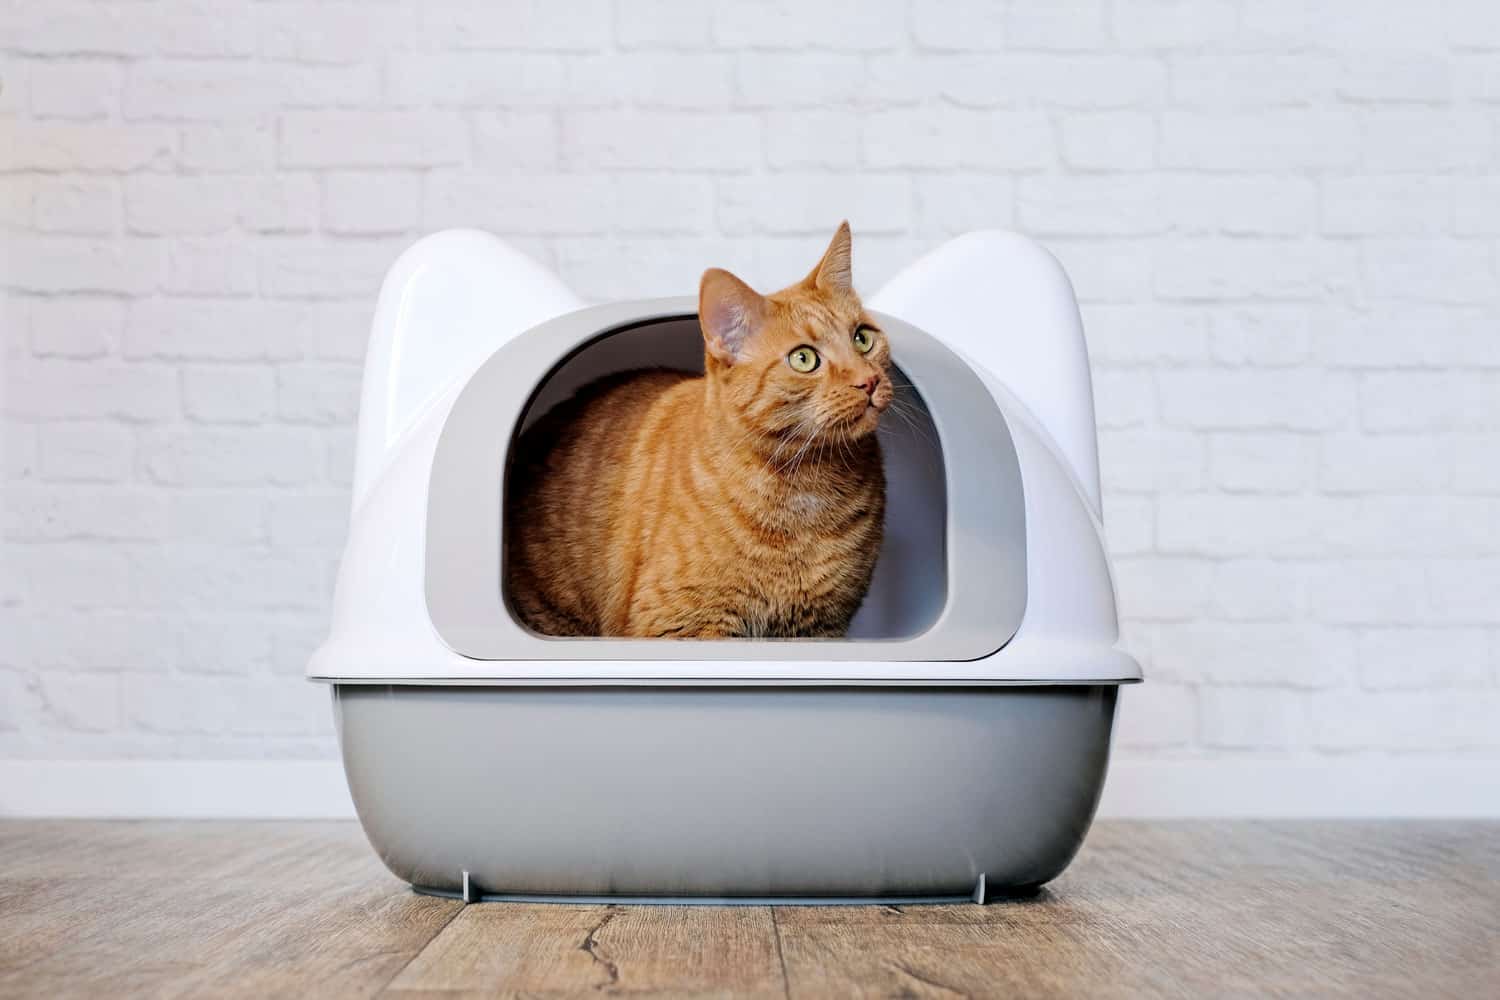 Cute ginger cat sitting in a litter box and looking sideways.